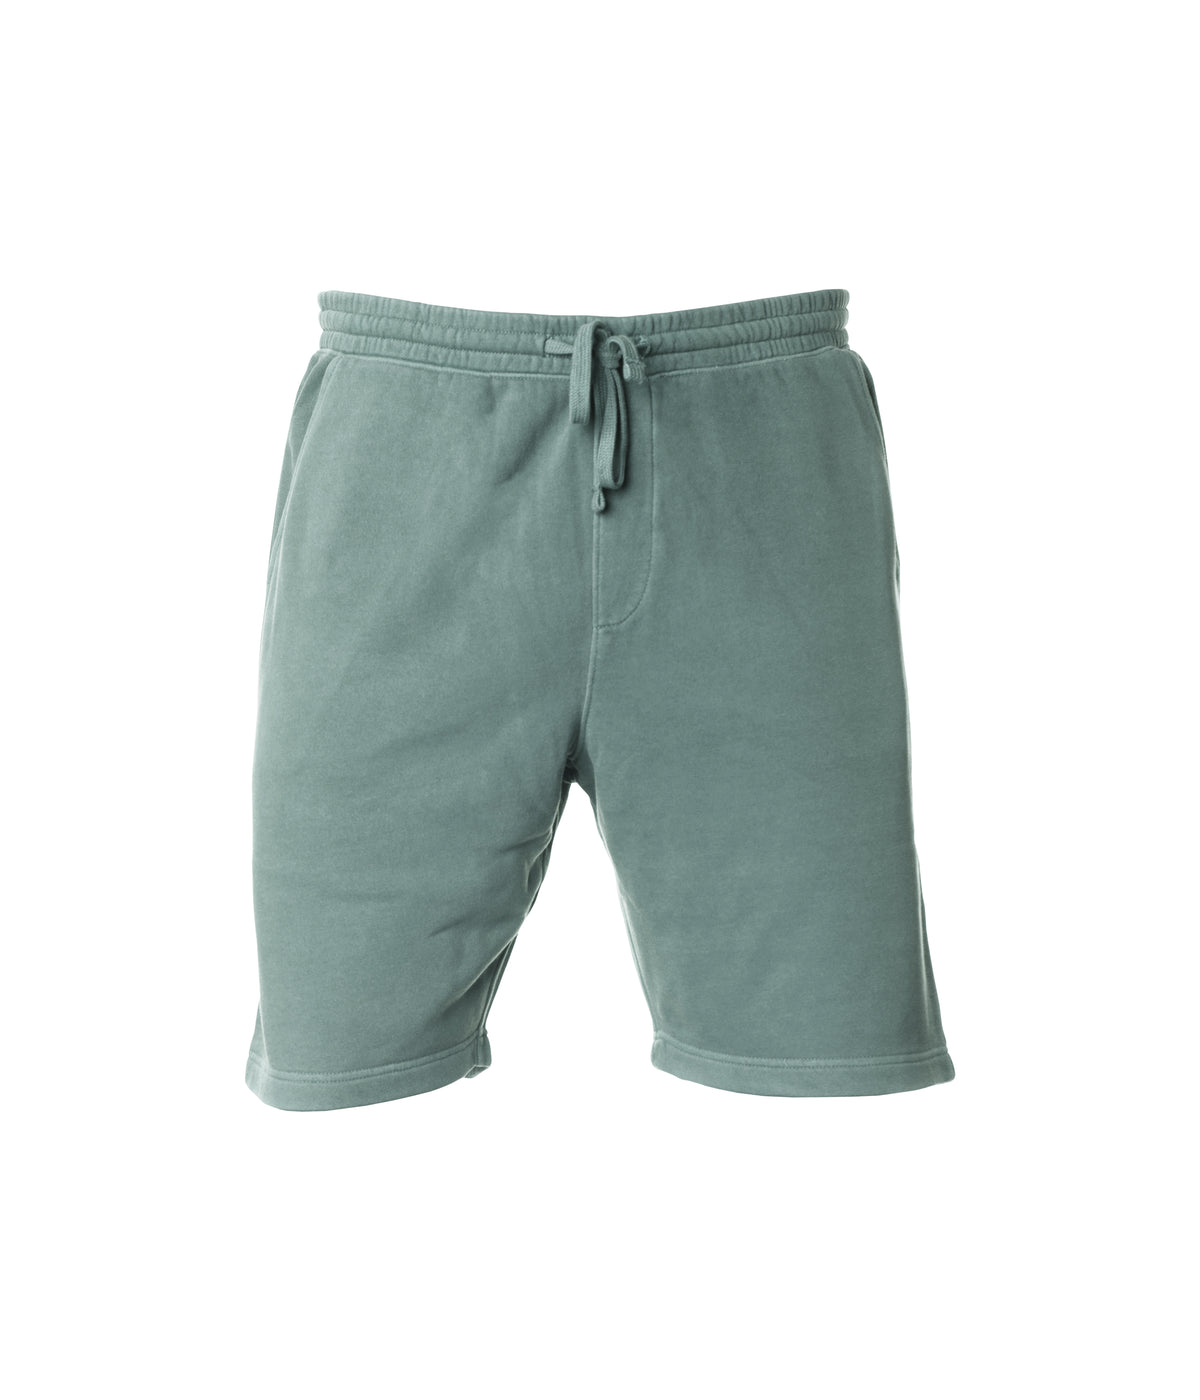 Men's Pigment Dyed Fleece Short | Independent Trading Company